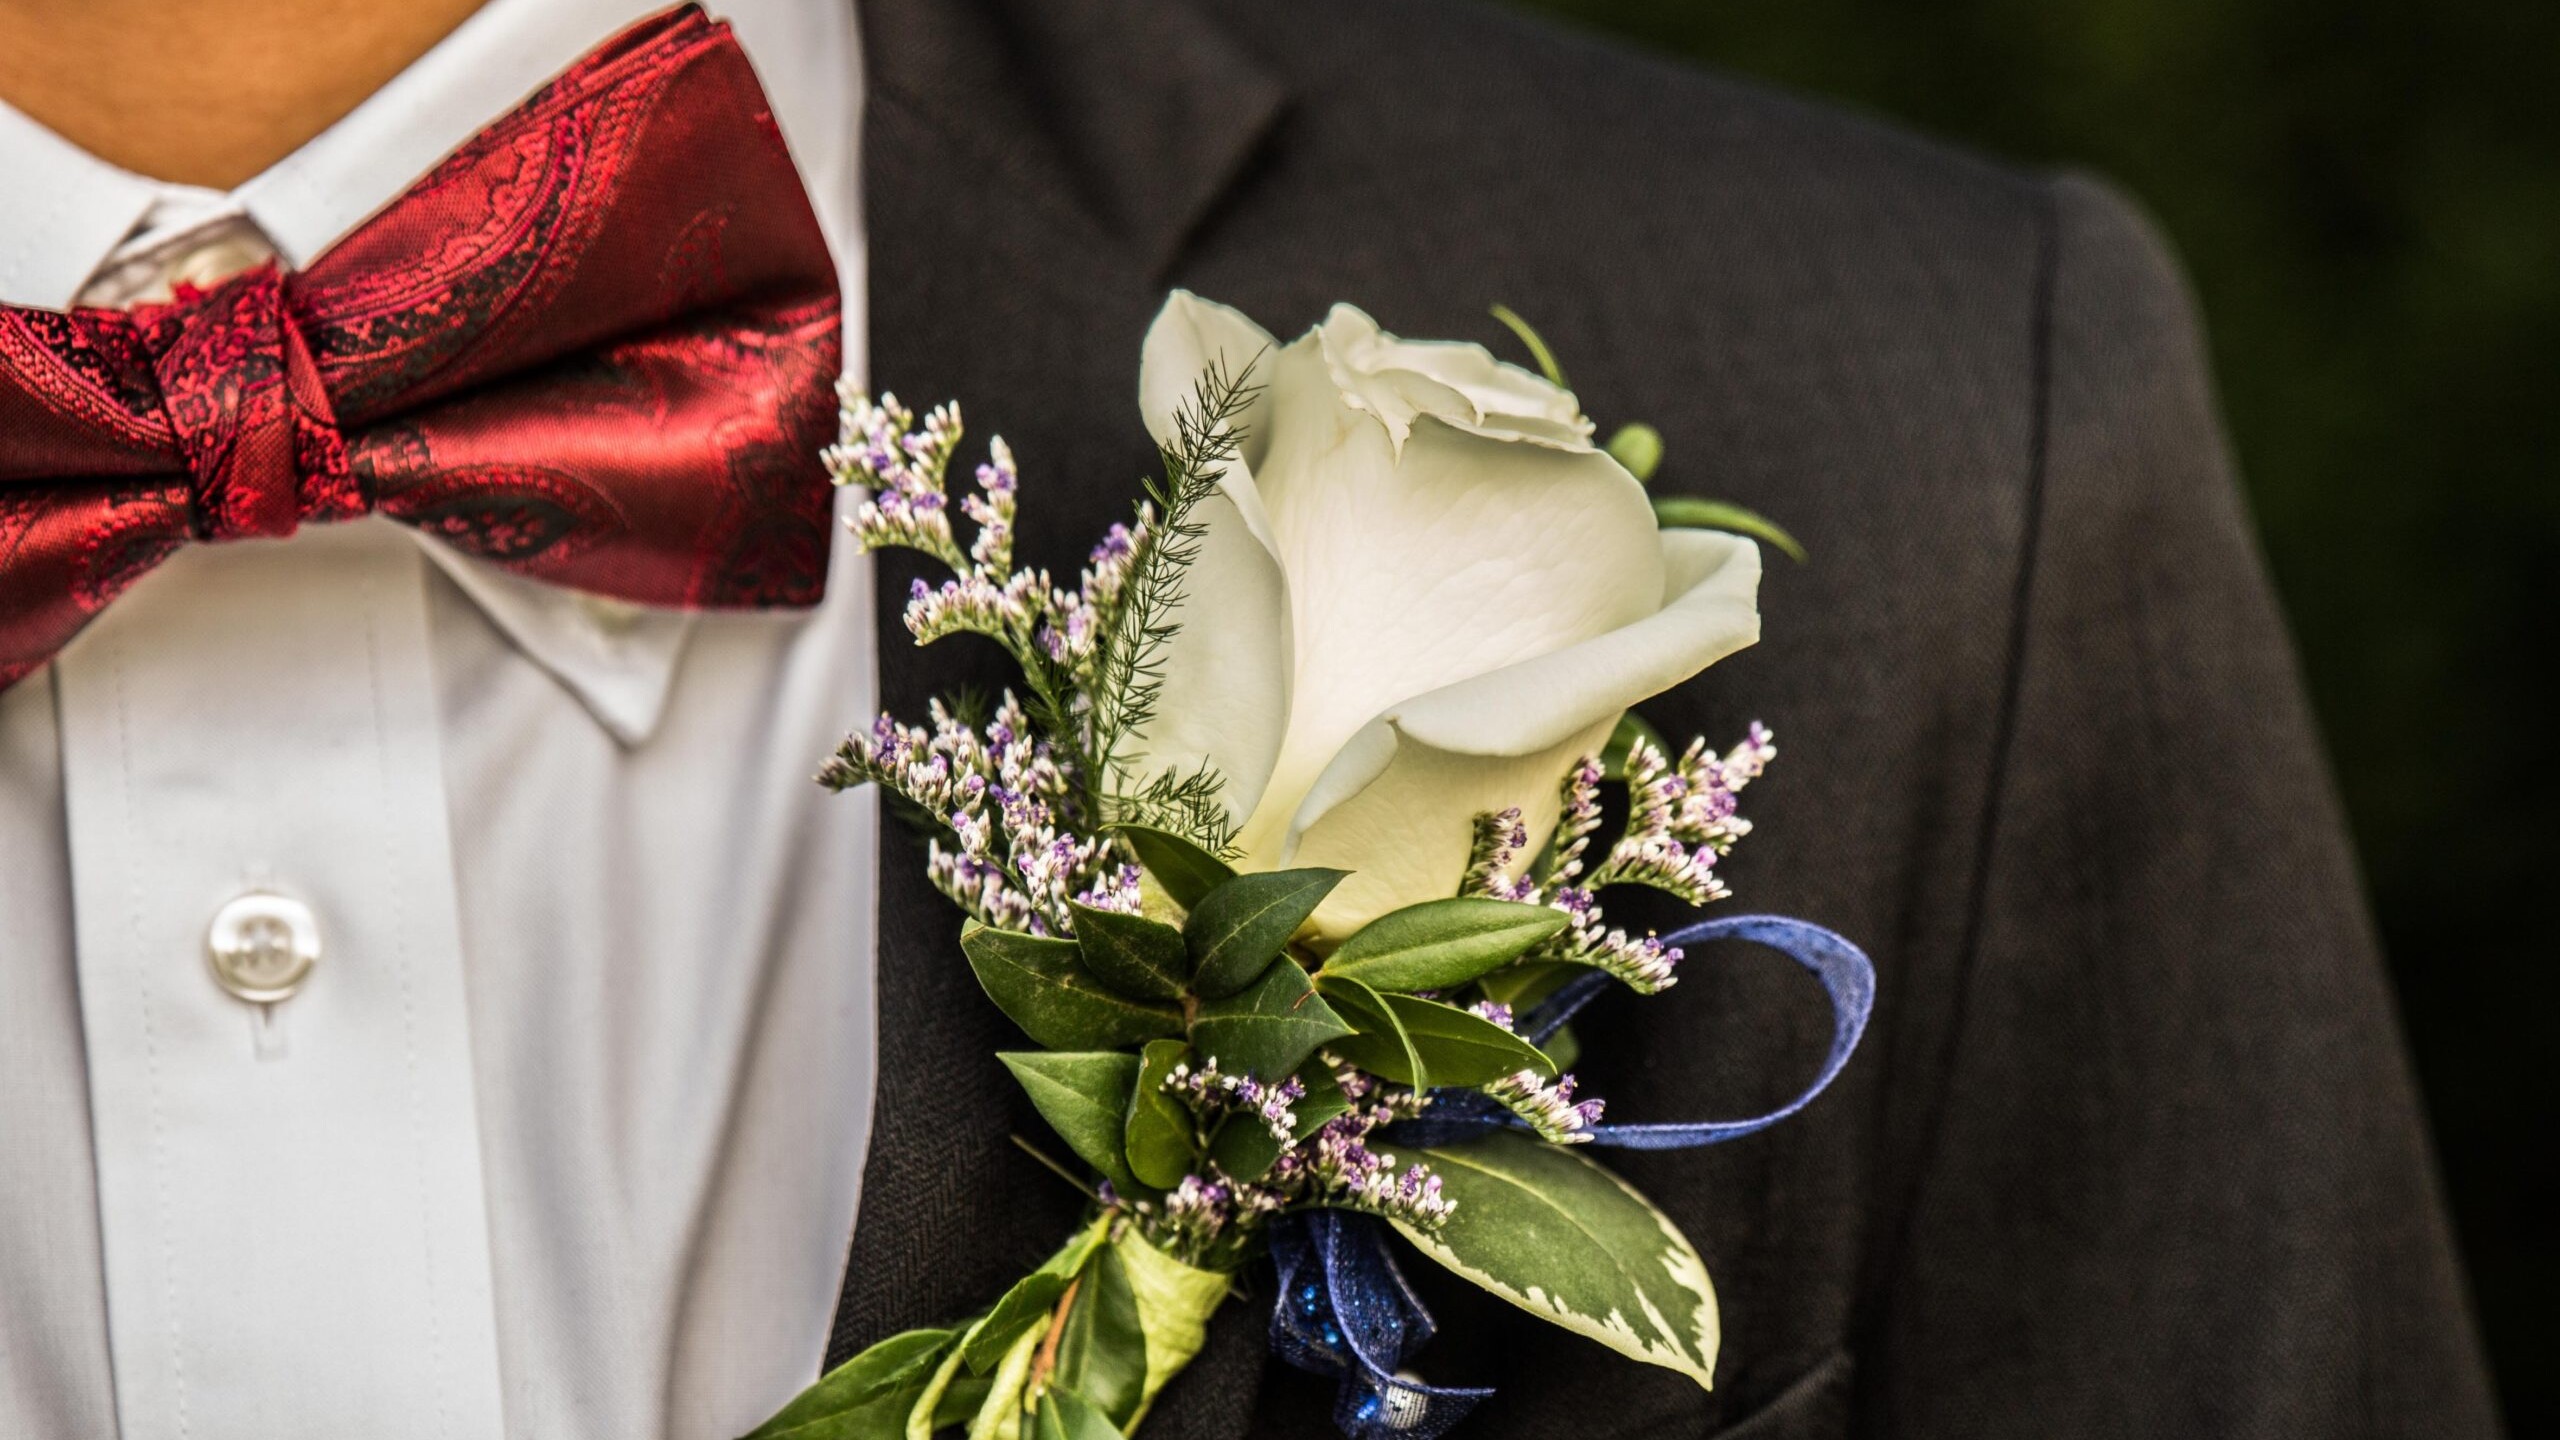 A boutonniere on a black suit next to a red bowtie.